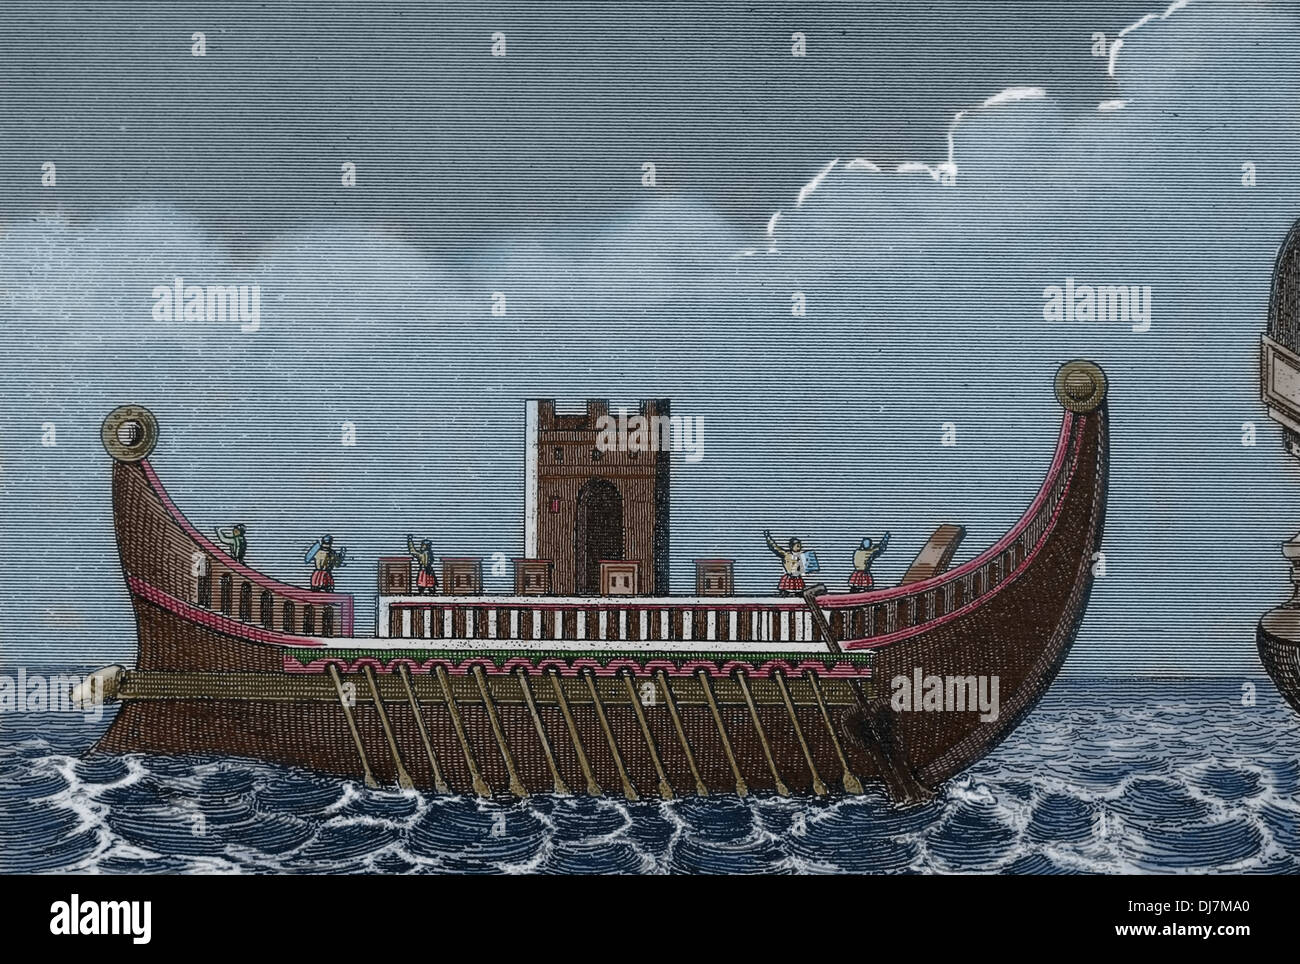 Ptolemaic Empire in Egypt during the Hellenistic period. Ptolemy's show-ship. Engraving. (Later colouration) Stock Photo